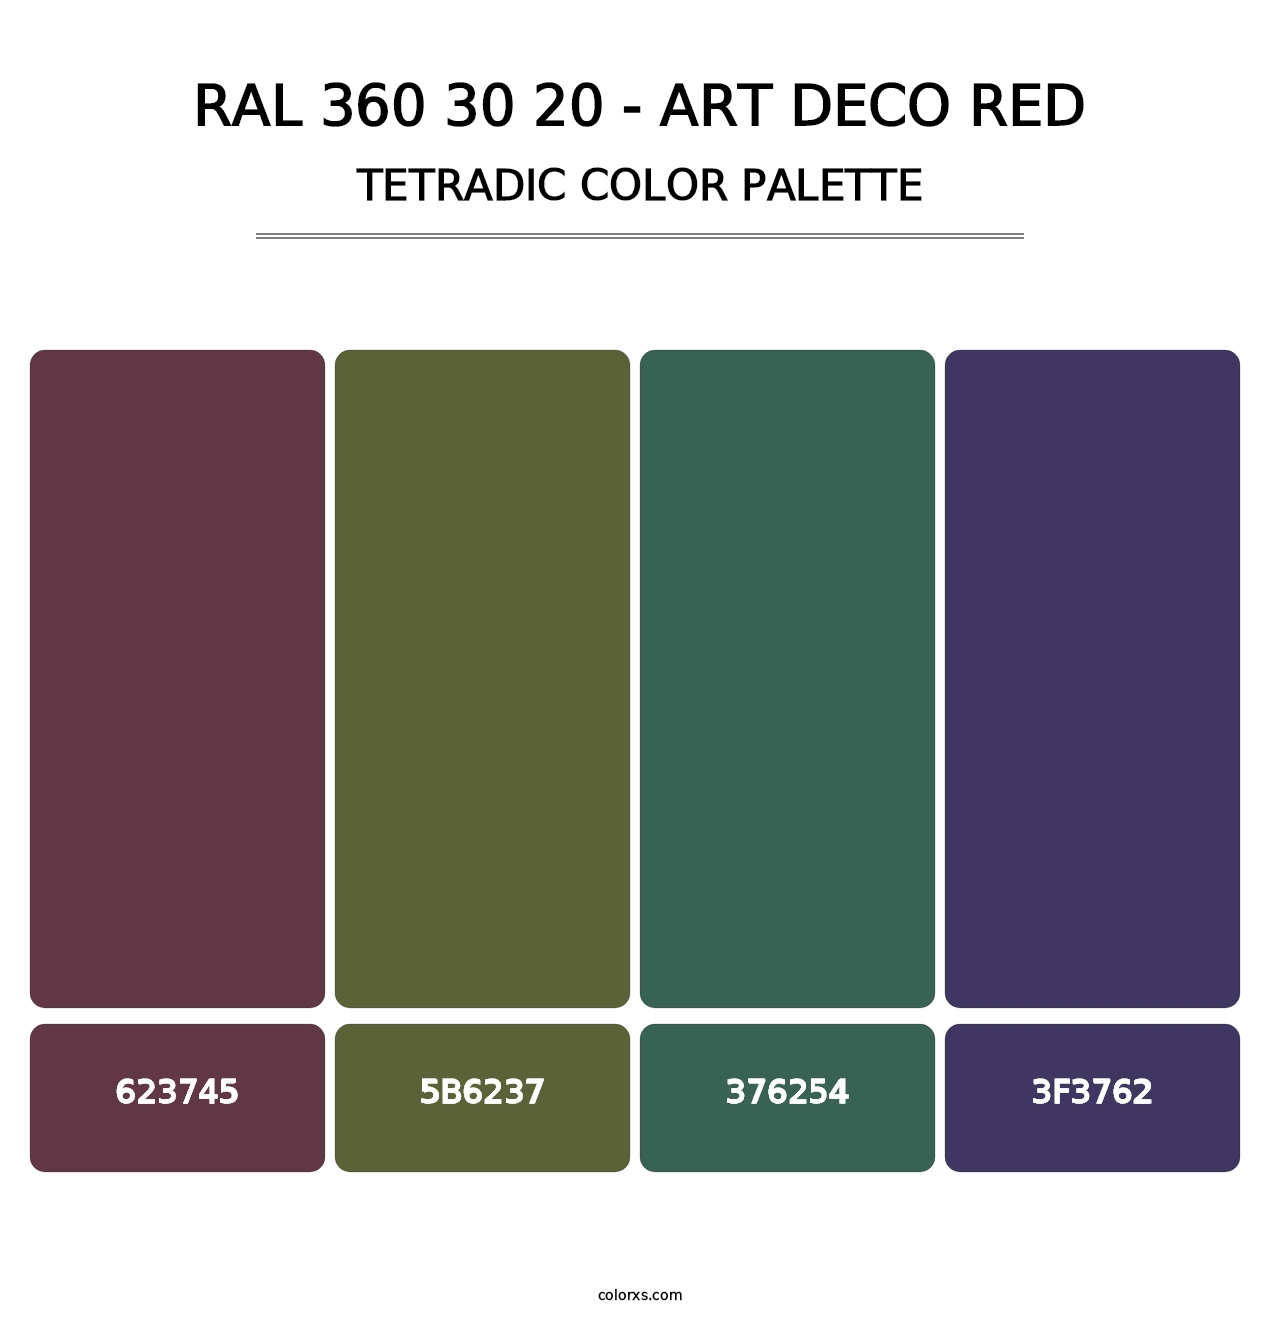 RAL 360 30 20 - Art Deco Red - Tetradic Color Palette